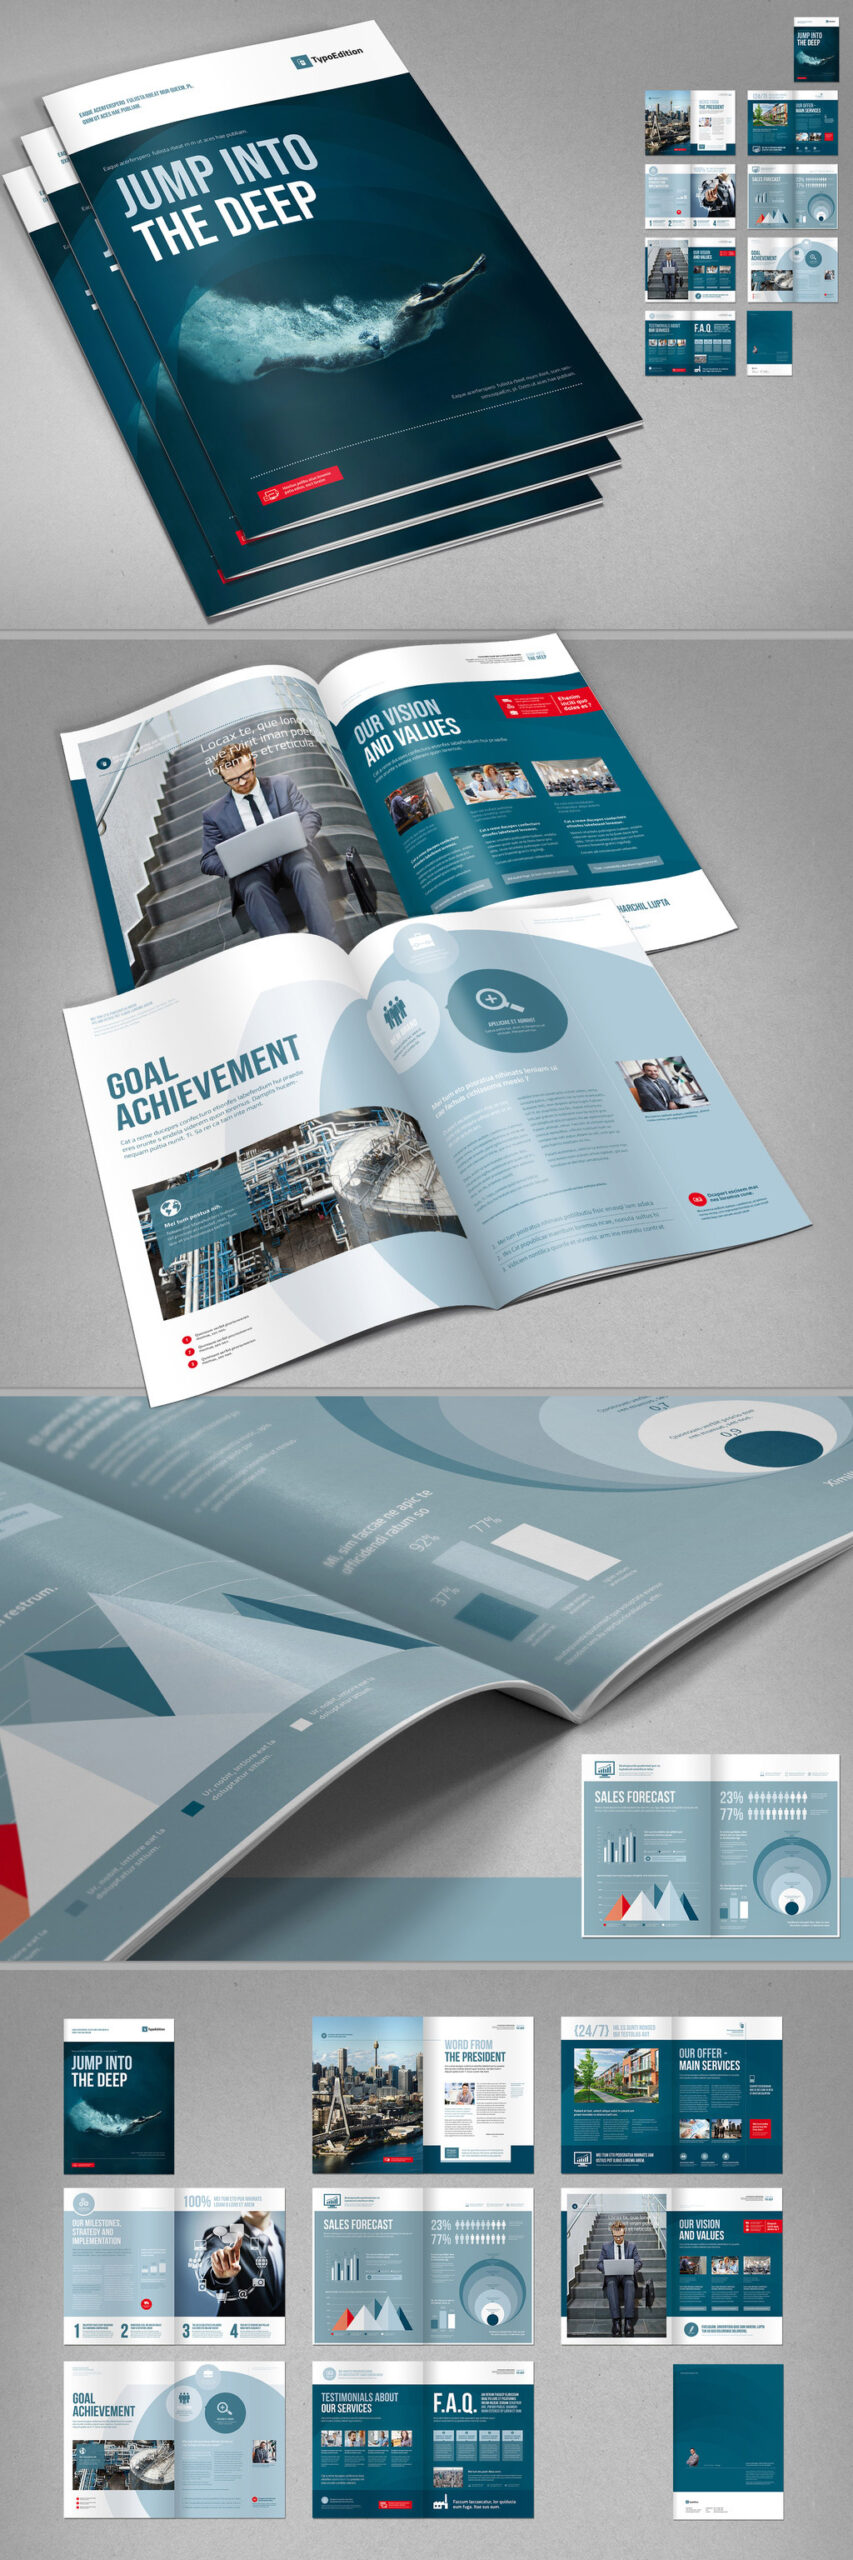 Five Must-Have Brochure Templates for Adobe InDesign With Adobe Indesign Brochure Templates